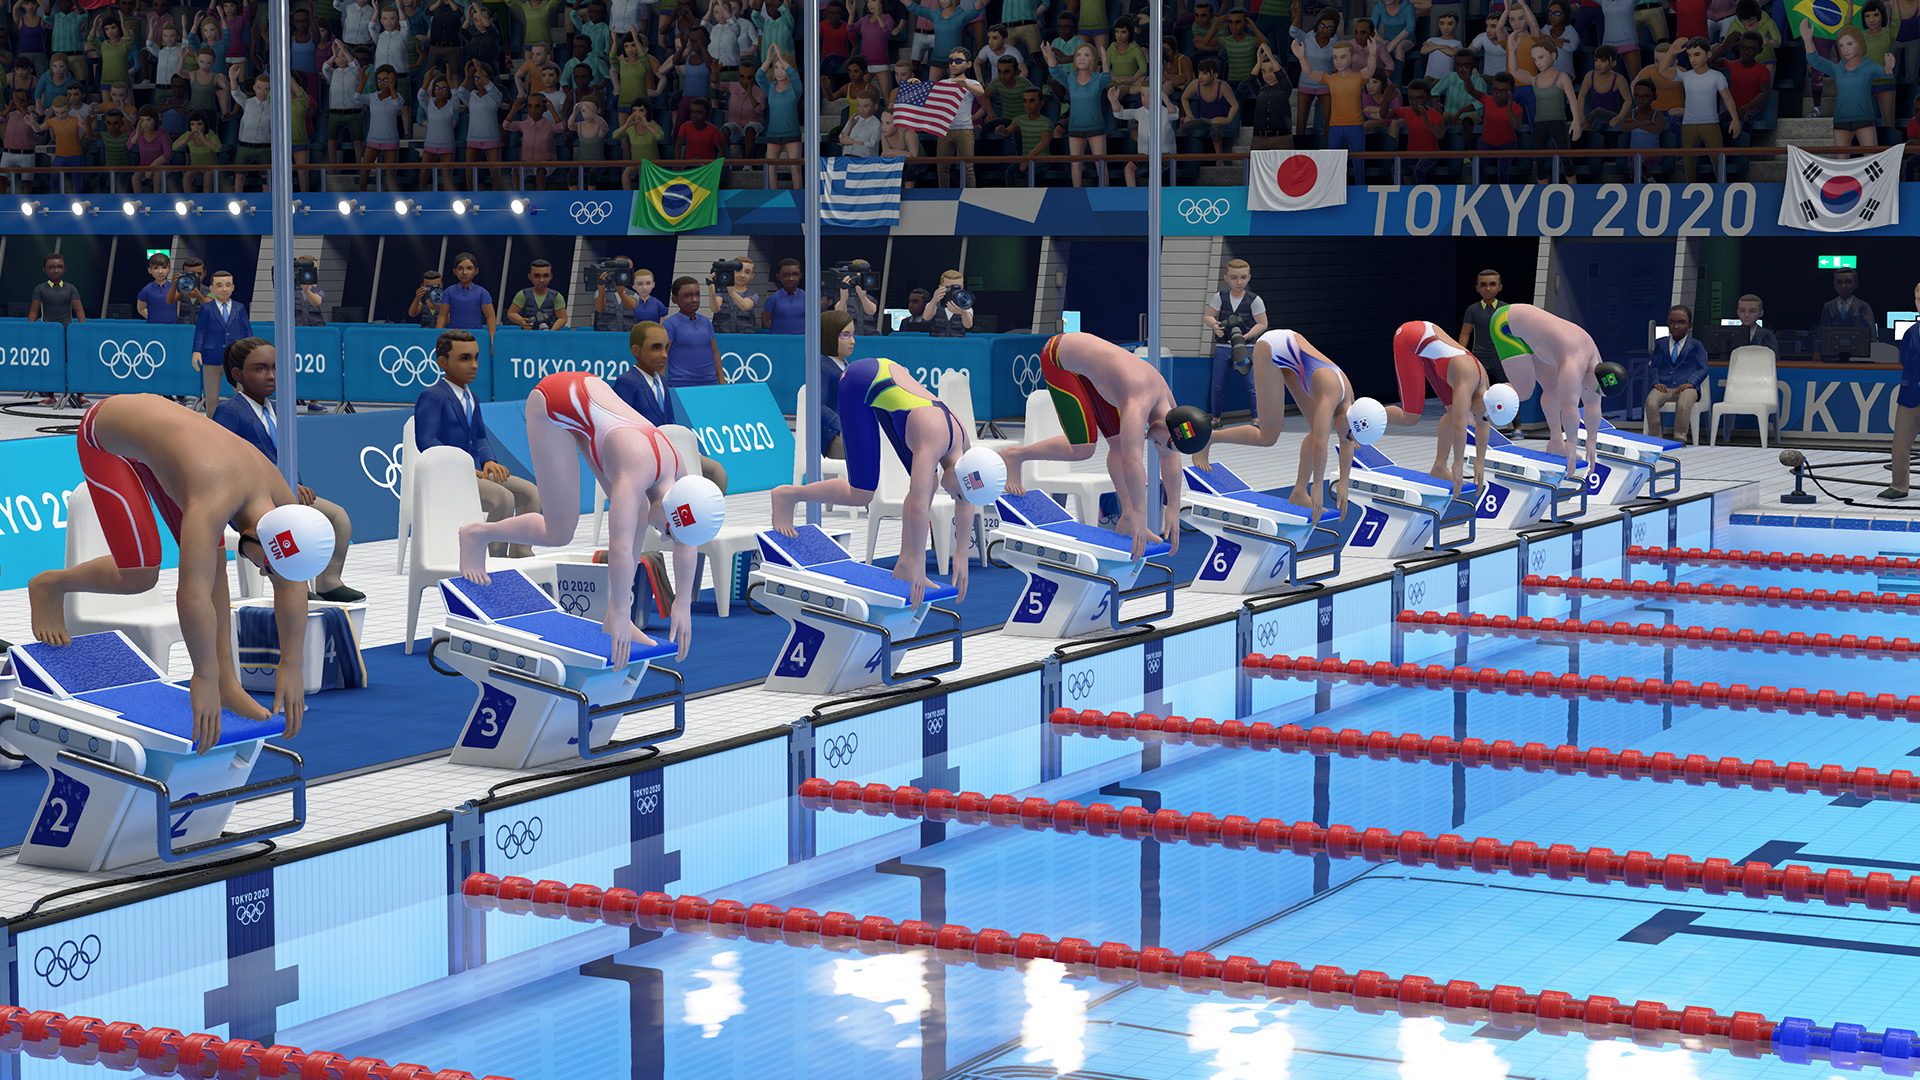 Olympic Games Tokyo 2020 - The Official Video Game - screenshot 8